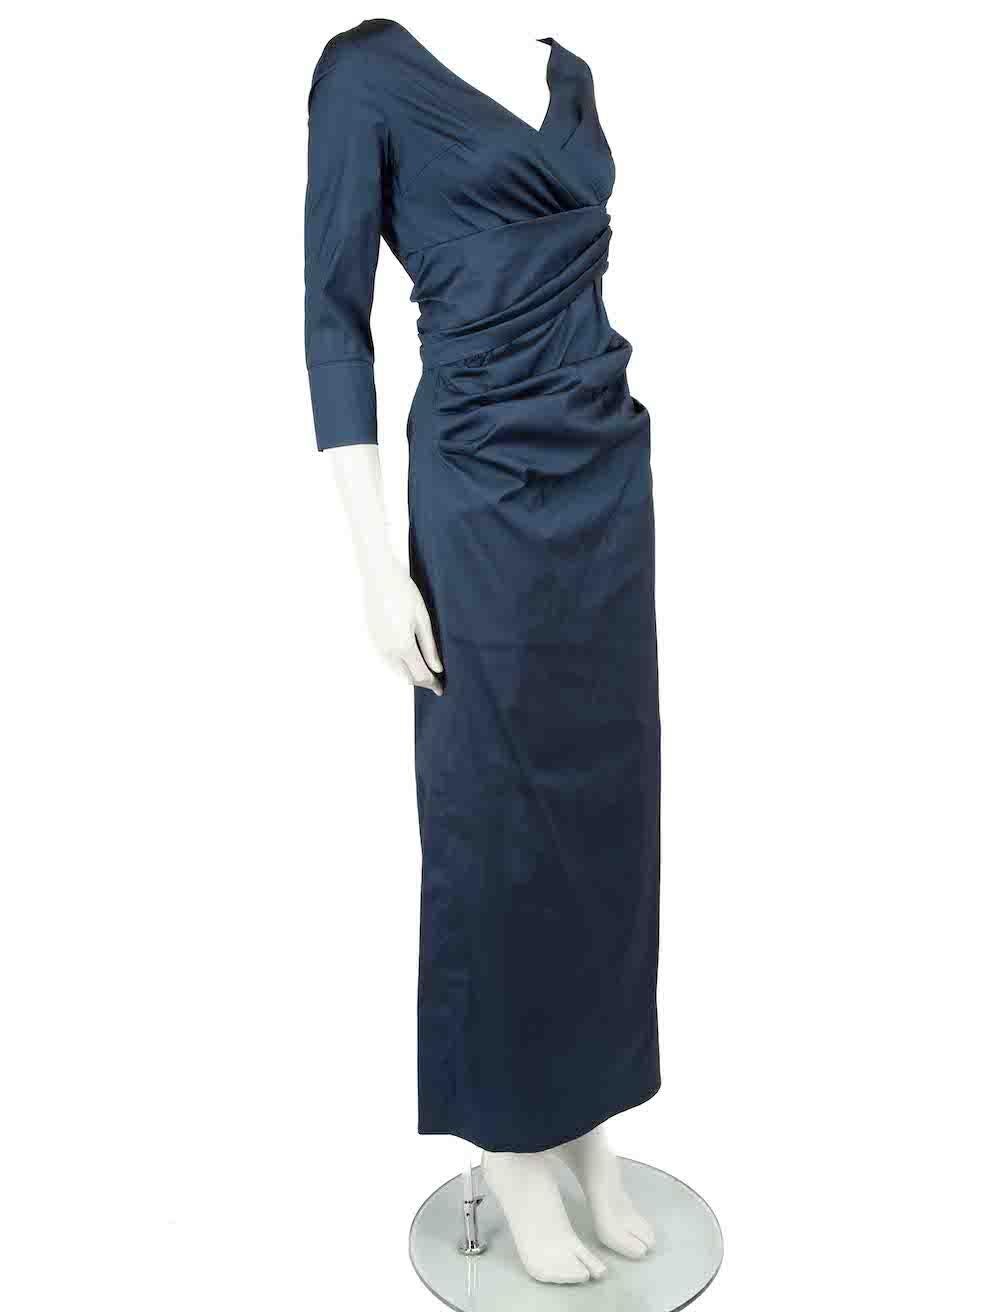 CONDITION is Very good. Hardly any visible wear to dress is evident on this used Talbot Runhof designer resale item.
 
 
 
 Details
 
 
 Navy
 
 Polyester
 
 Maxi gown
 
 Gathered accent
 
 V neckline
 
 Back zip closure with hook and eye
 
 Back